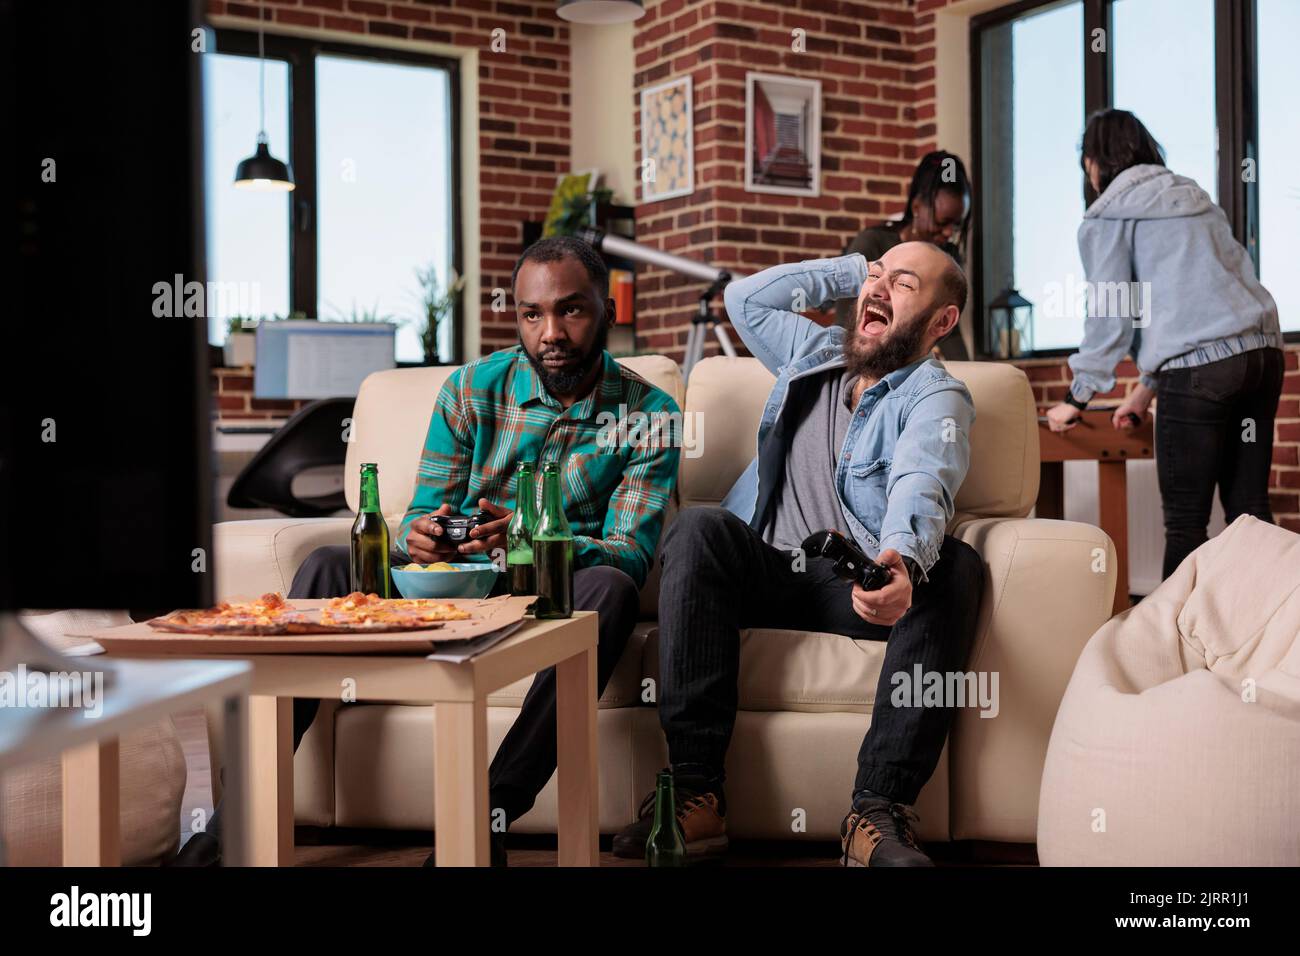 Frustrated men playing video games online and losing at home, feeling sad about lost competition. Group of friends enjoying fun leisure activity with alcohol beer bottles and food. Stock Photo